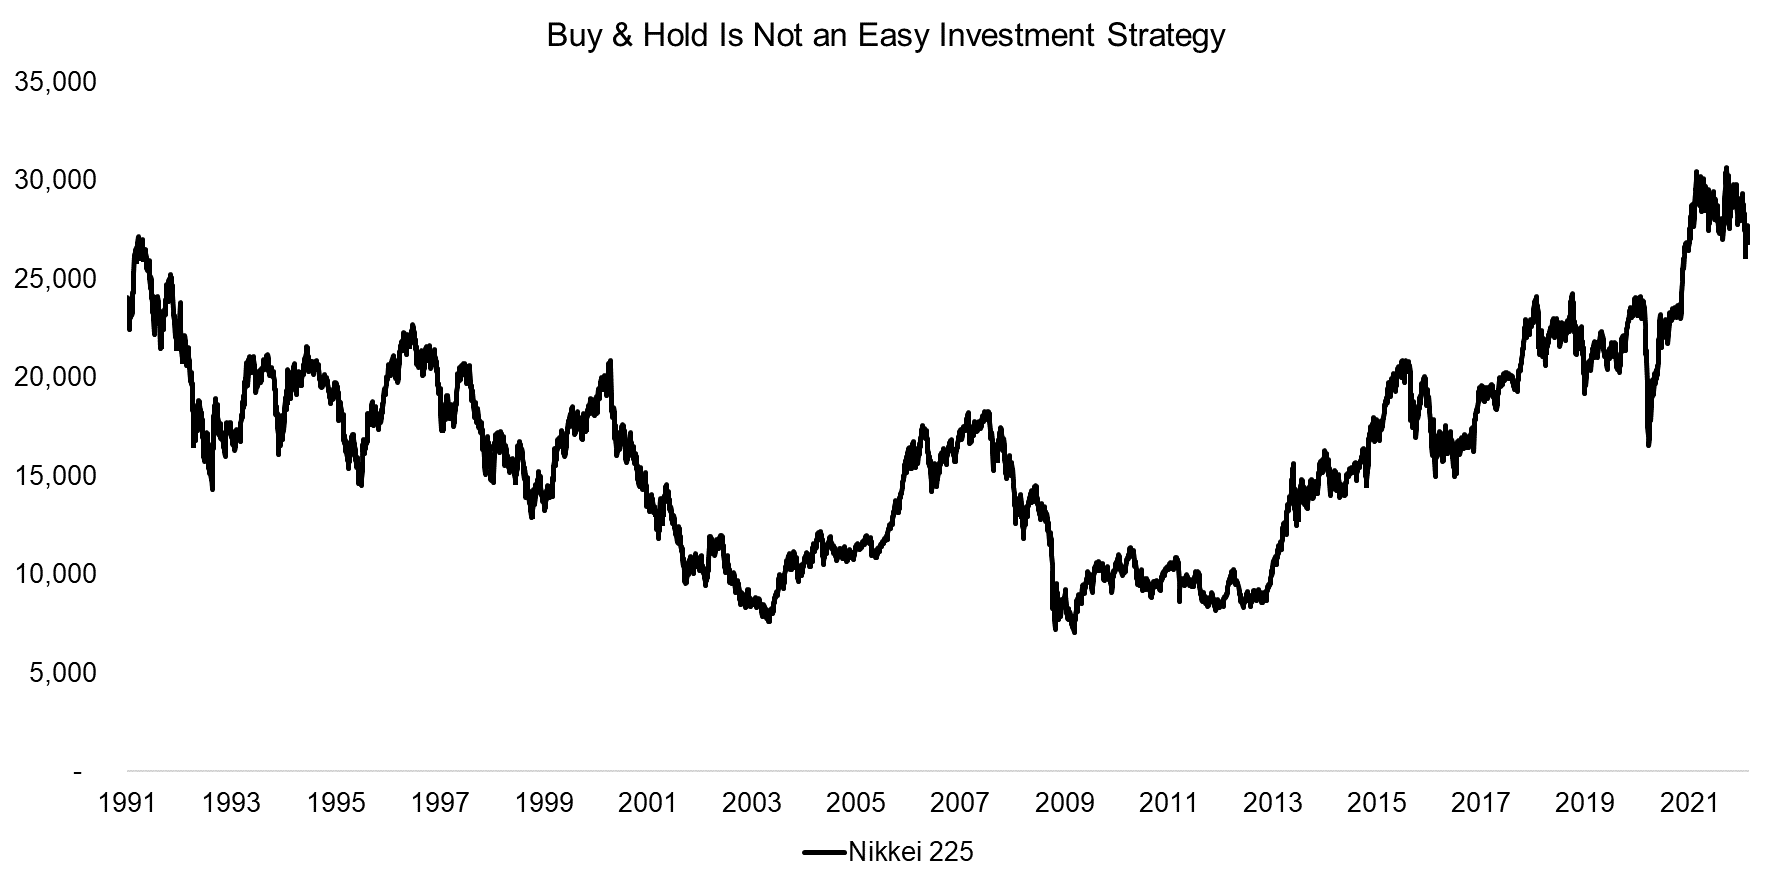 Buy & Hold Is Not an Easy Investment Strategy